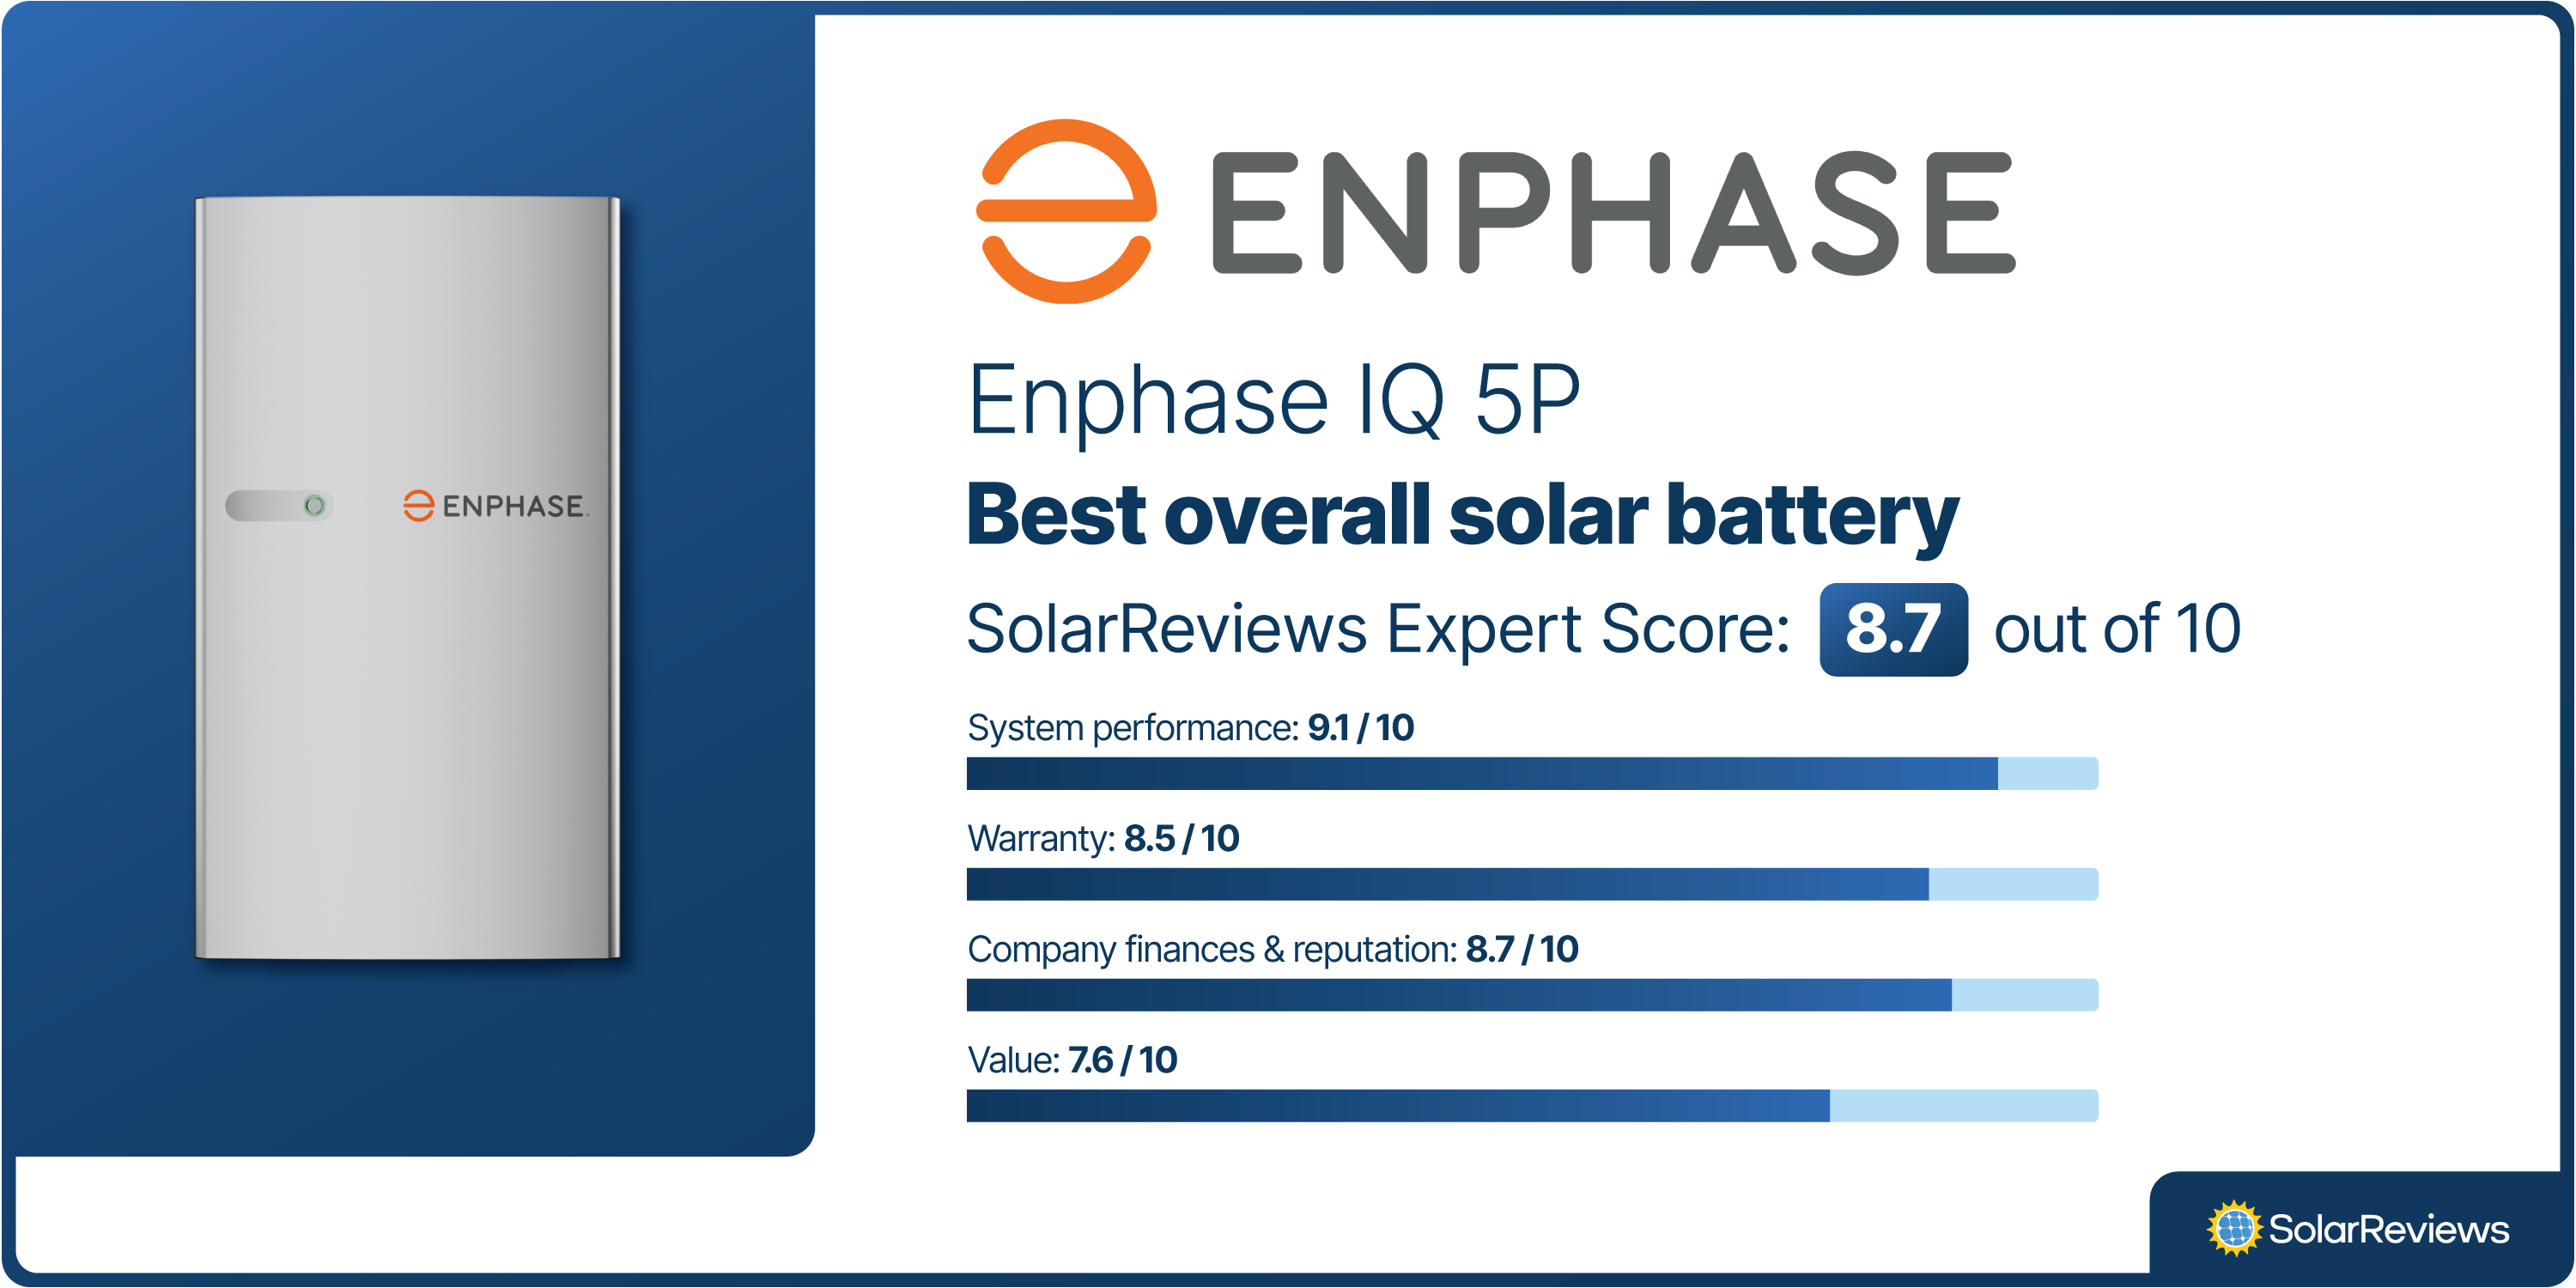 Enphase was voted best overall solar battery, with a SolarReviews Expert Score of 8.7/10, scoring highest in system performance, warranty, and company finance and reputation categories.